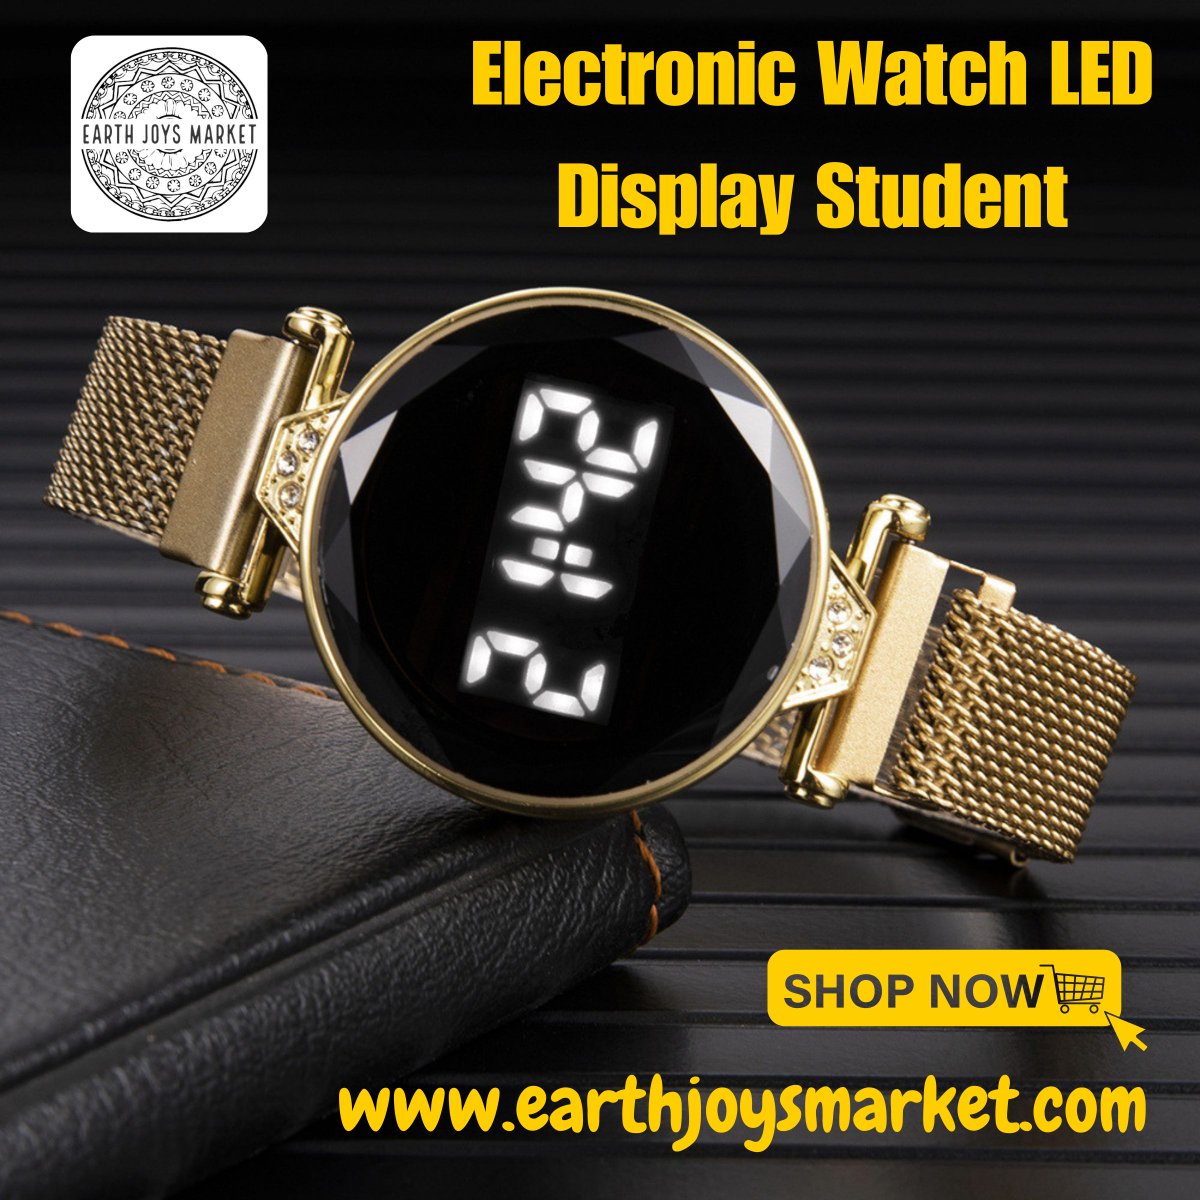 'Stay Stylish with the Electronic LED Display Watch for Students | Earth Joys Market' Shop Now: ➡ earthjoysmarket.com/product/electr… #LuxuryWatches #BrandedWatches #Smartwatch #WatchWholesaler #EarthJoysMarket #watches #woodenwatch #SmartWatch #amazonfinds #alibabacloud #aliexpressfinds